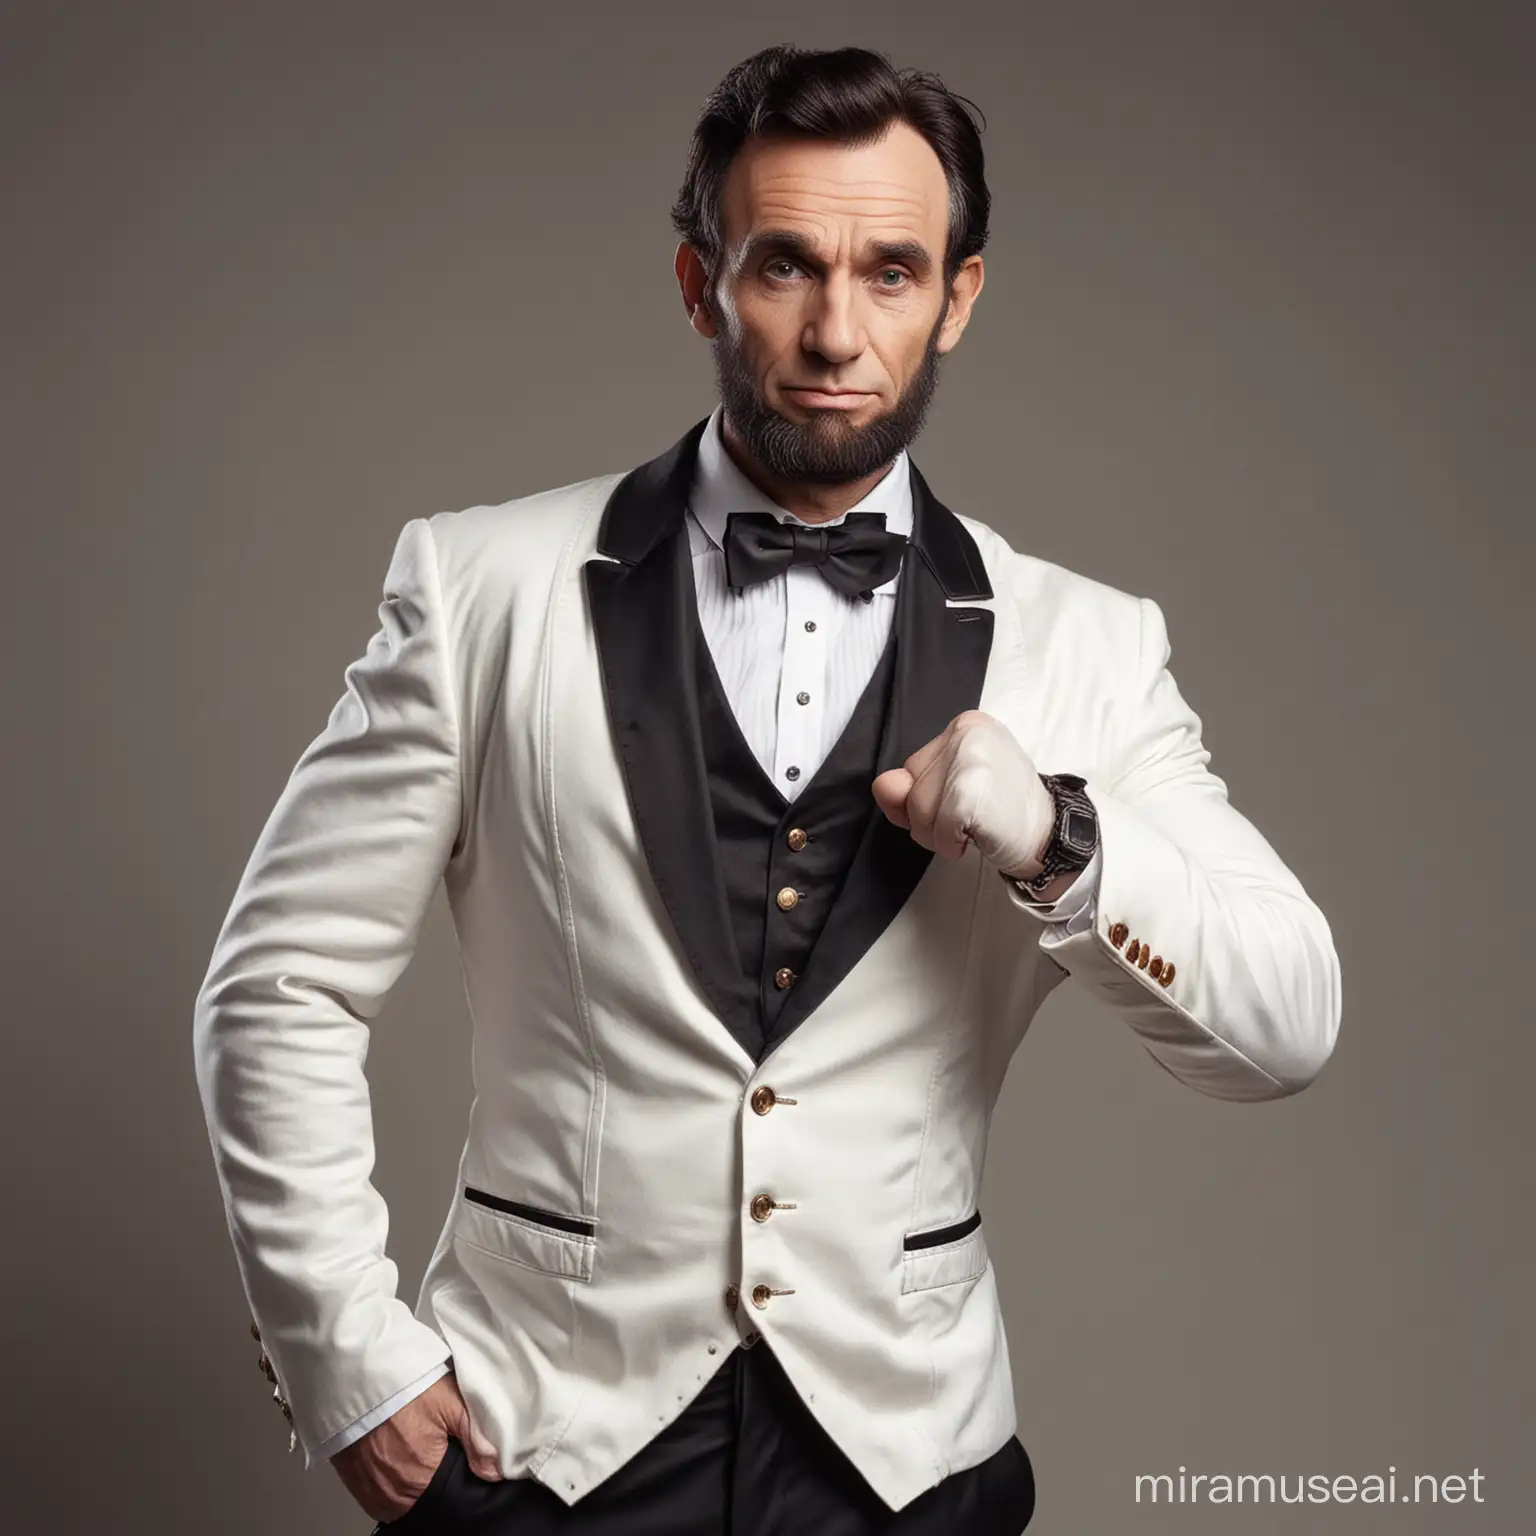 Abraham Lincoln, White Male, Heavy Sexy Swole, Bodybuilders, Fullview, Fullview, Posing Mode, Wearing An Whiteish Steampunk Blazer Tuxedo, Doing An YouTube Video, Selfie Photograph.